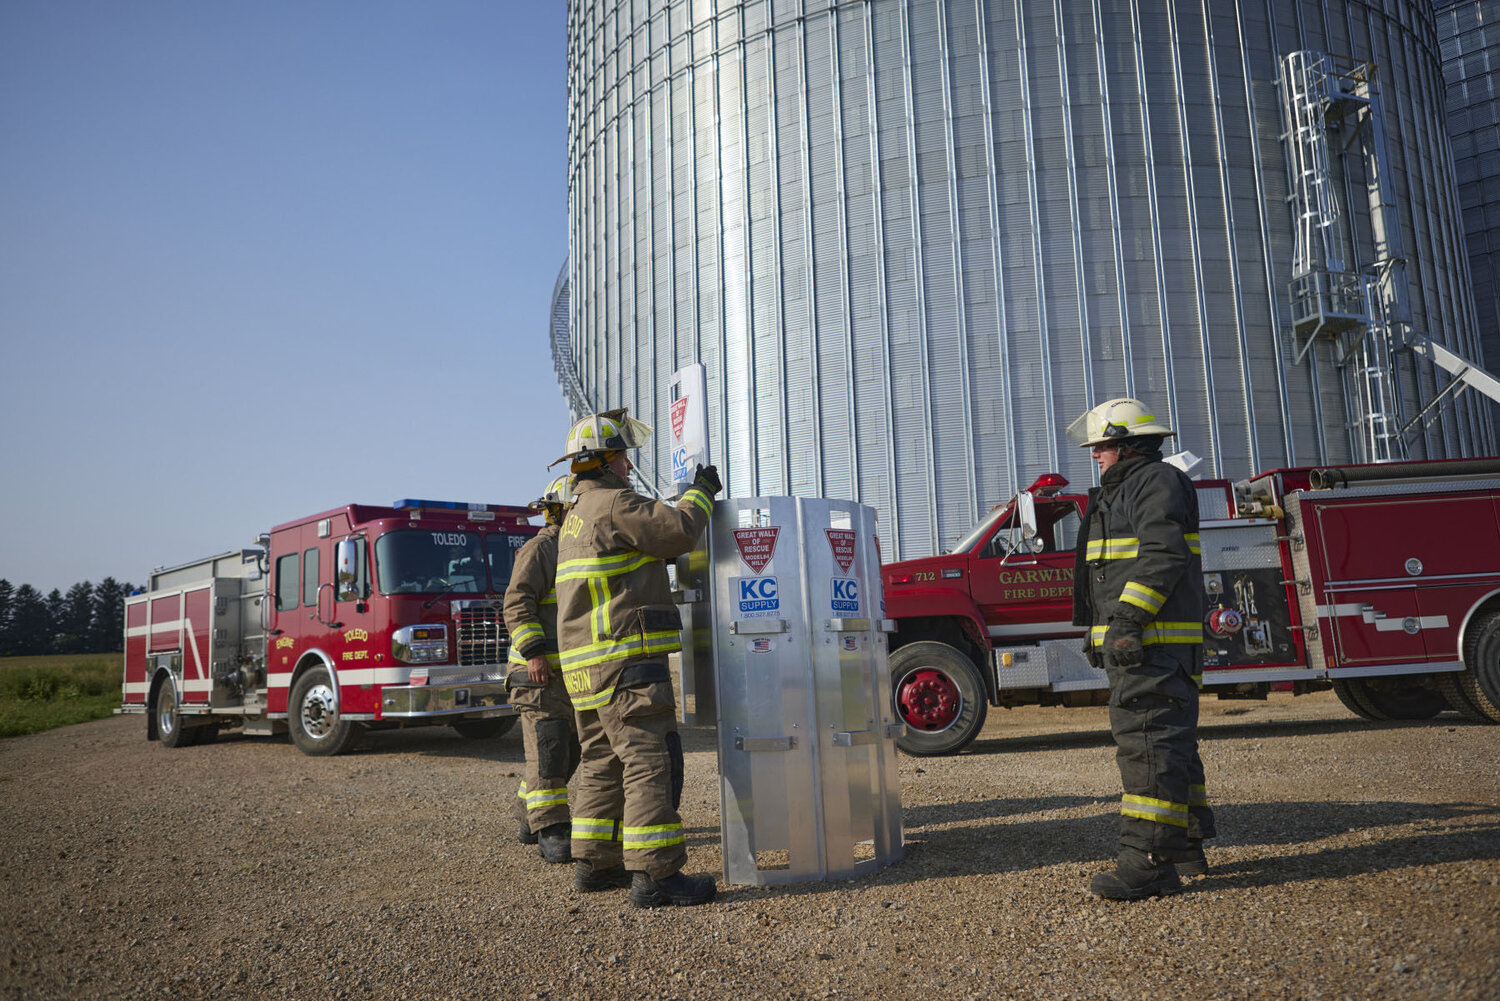 Firefighters from Garwin and Toledo (Iowa) fire departments work with a grain rescue tube similar to what select fire departments in Somerset, Dorchester and Talbot counties received through Nationwide’ Grain Bin Safety Program.